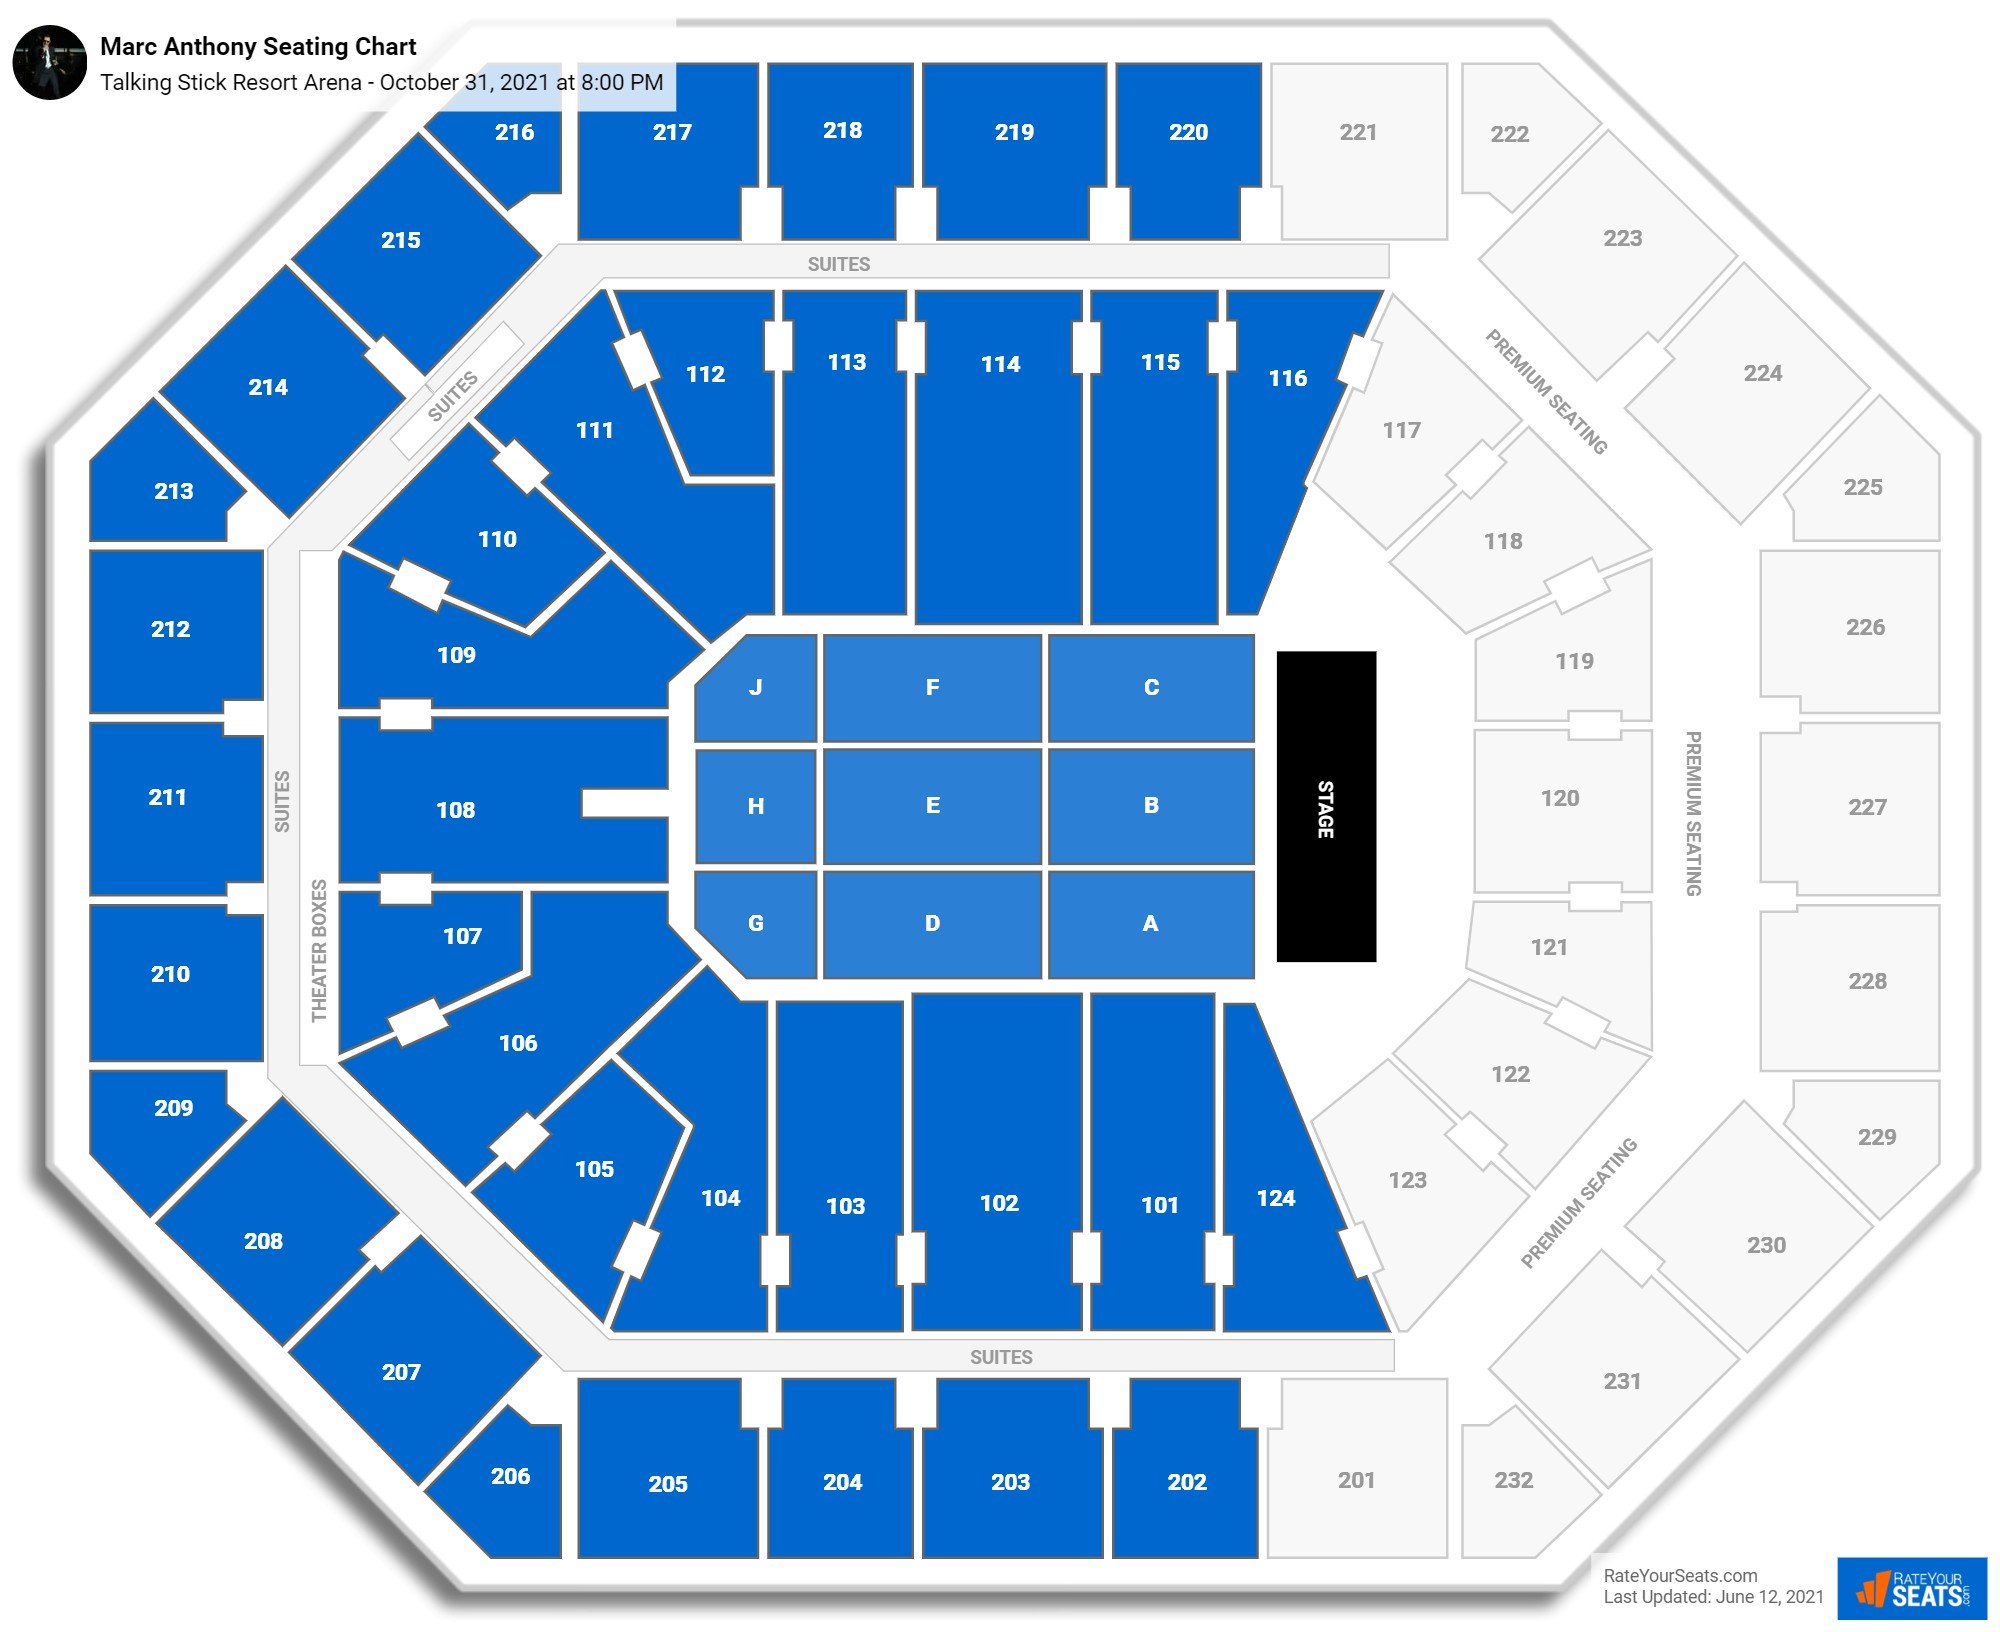 Talking Stick Resort Arena Seating Charts for Concerts